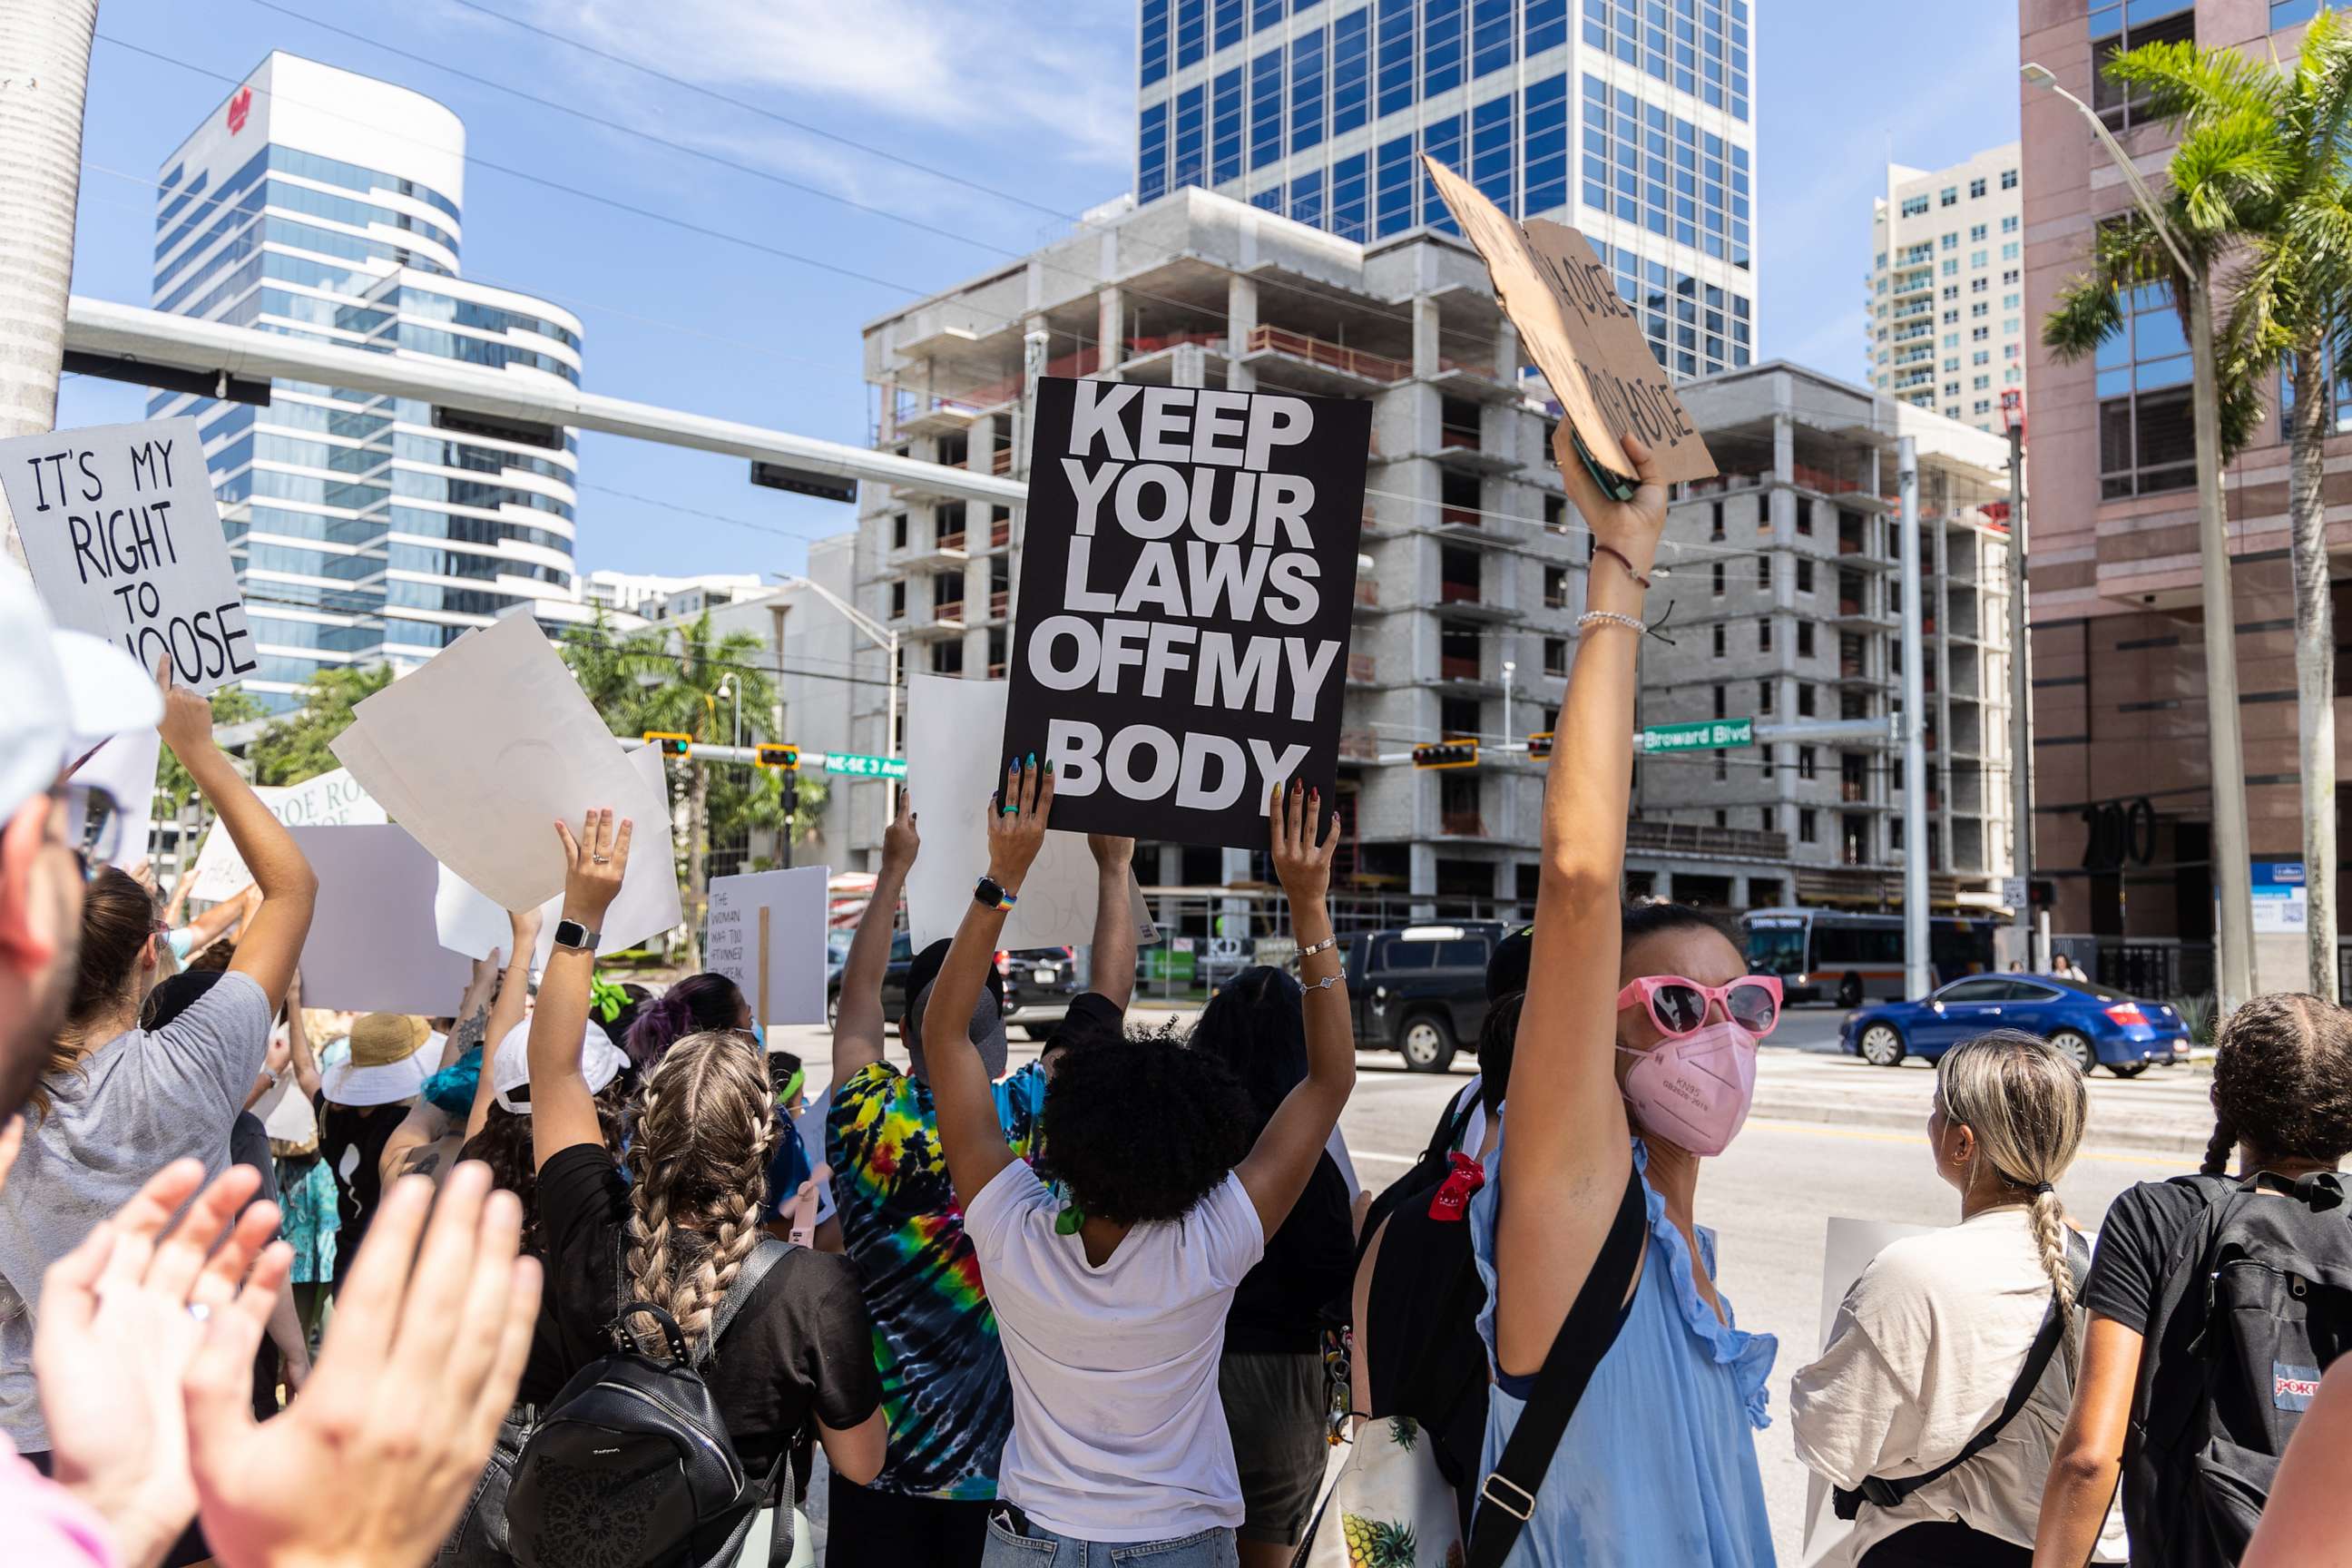 PHOTO: An abortion rights activist holds a sign at a protest in support of abortion access, July 13, 2022, in Fort Lauderdale, Fla.